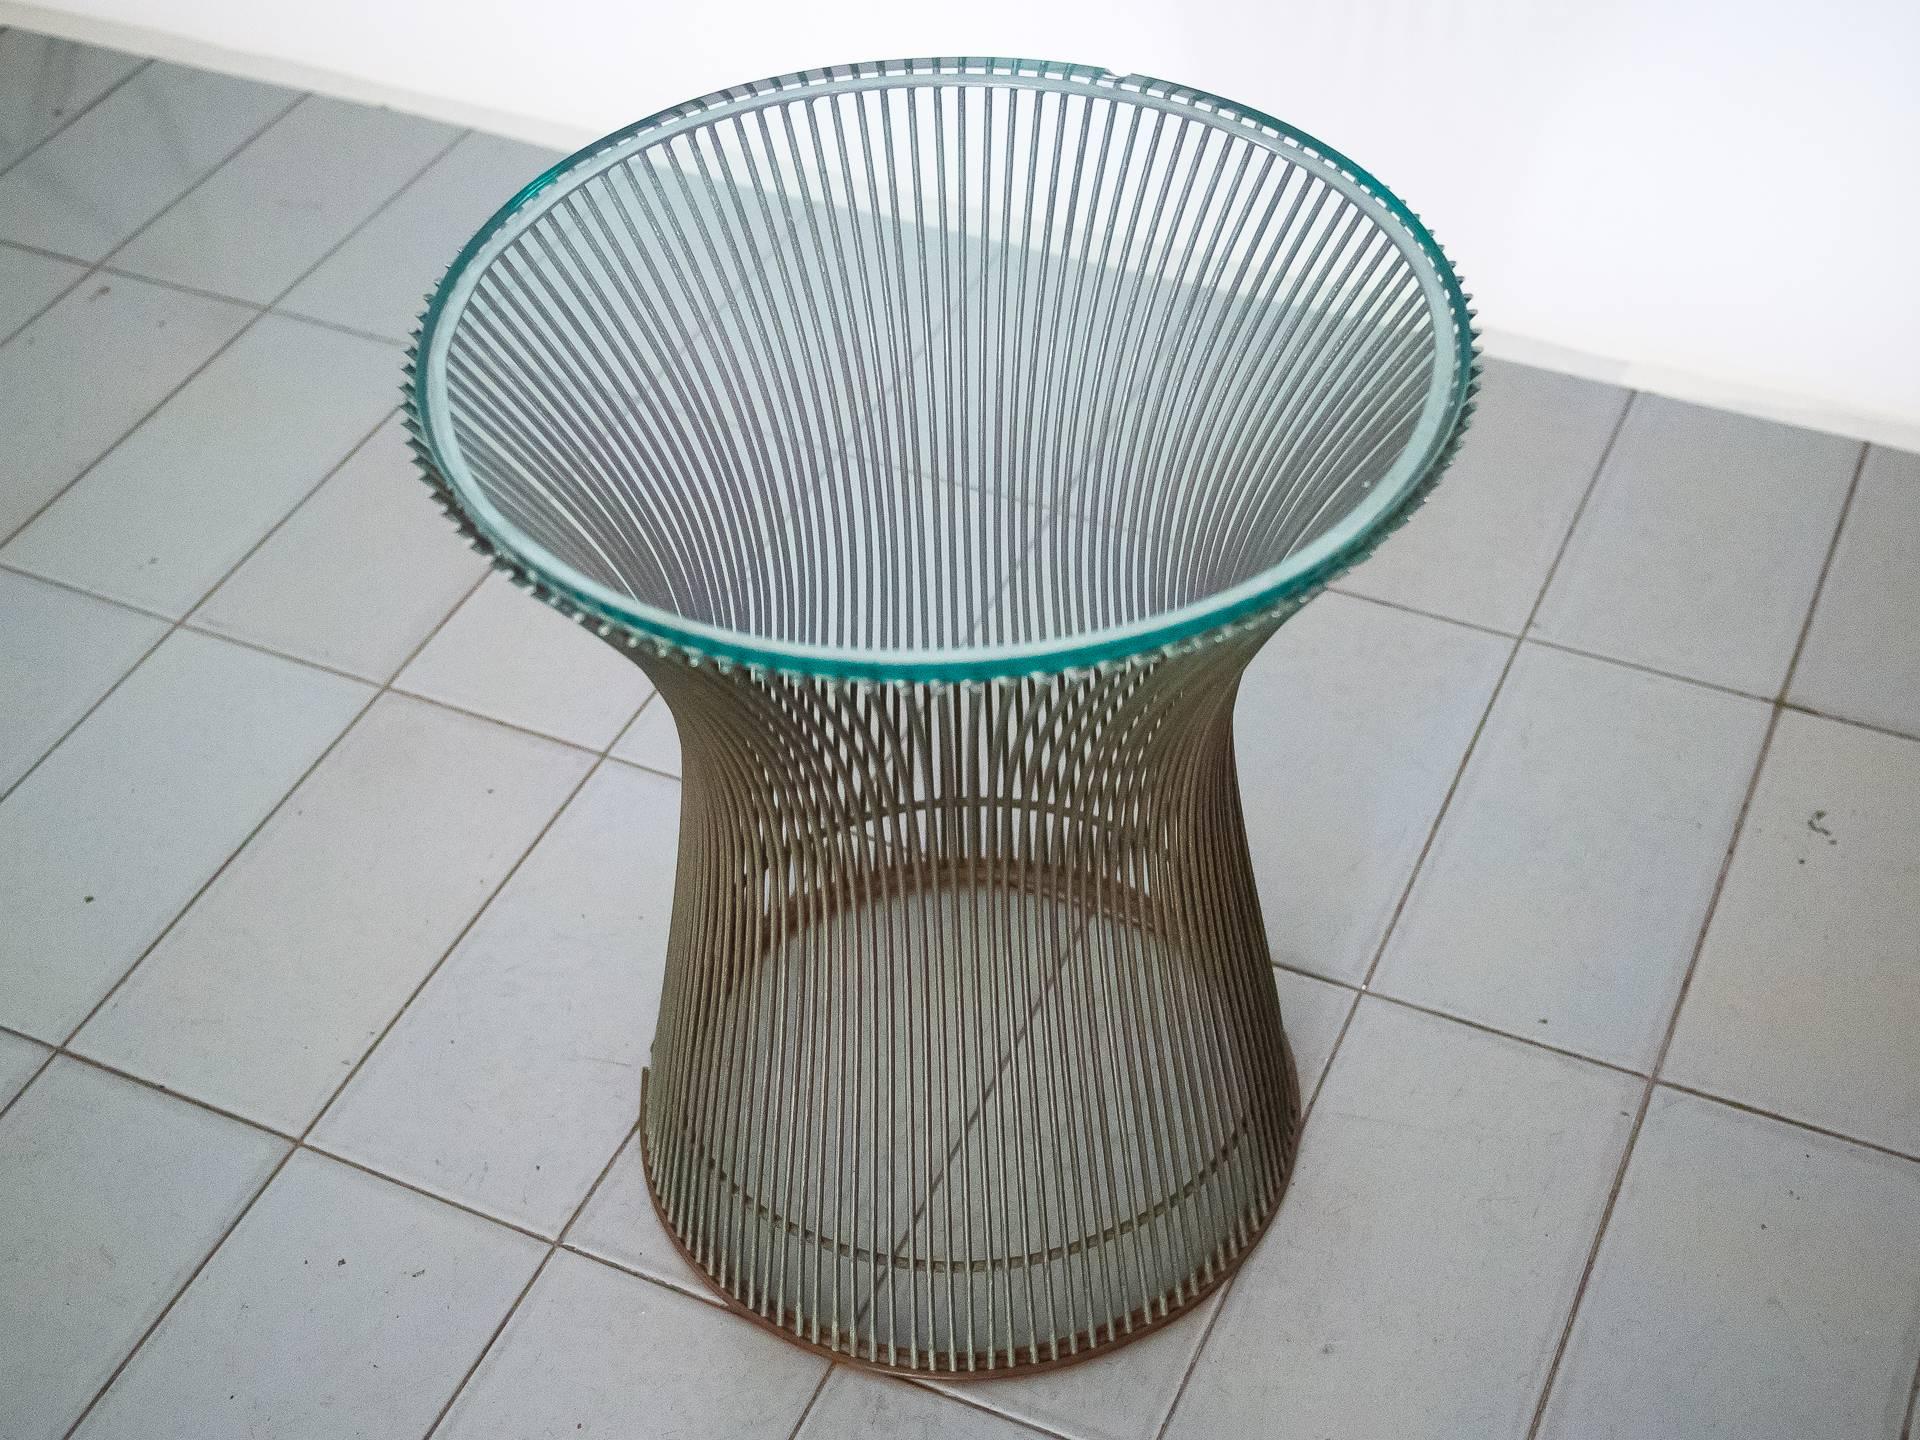 20th Century Side Table Iron and Glass by Warren Platner for Knoll Inc., Brazilian Production